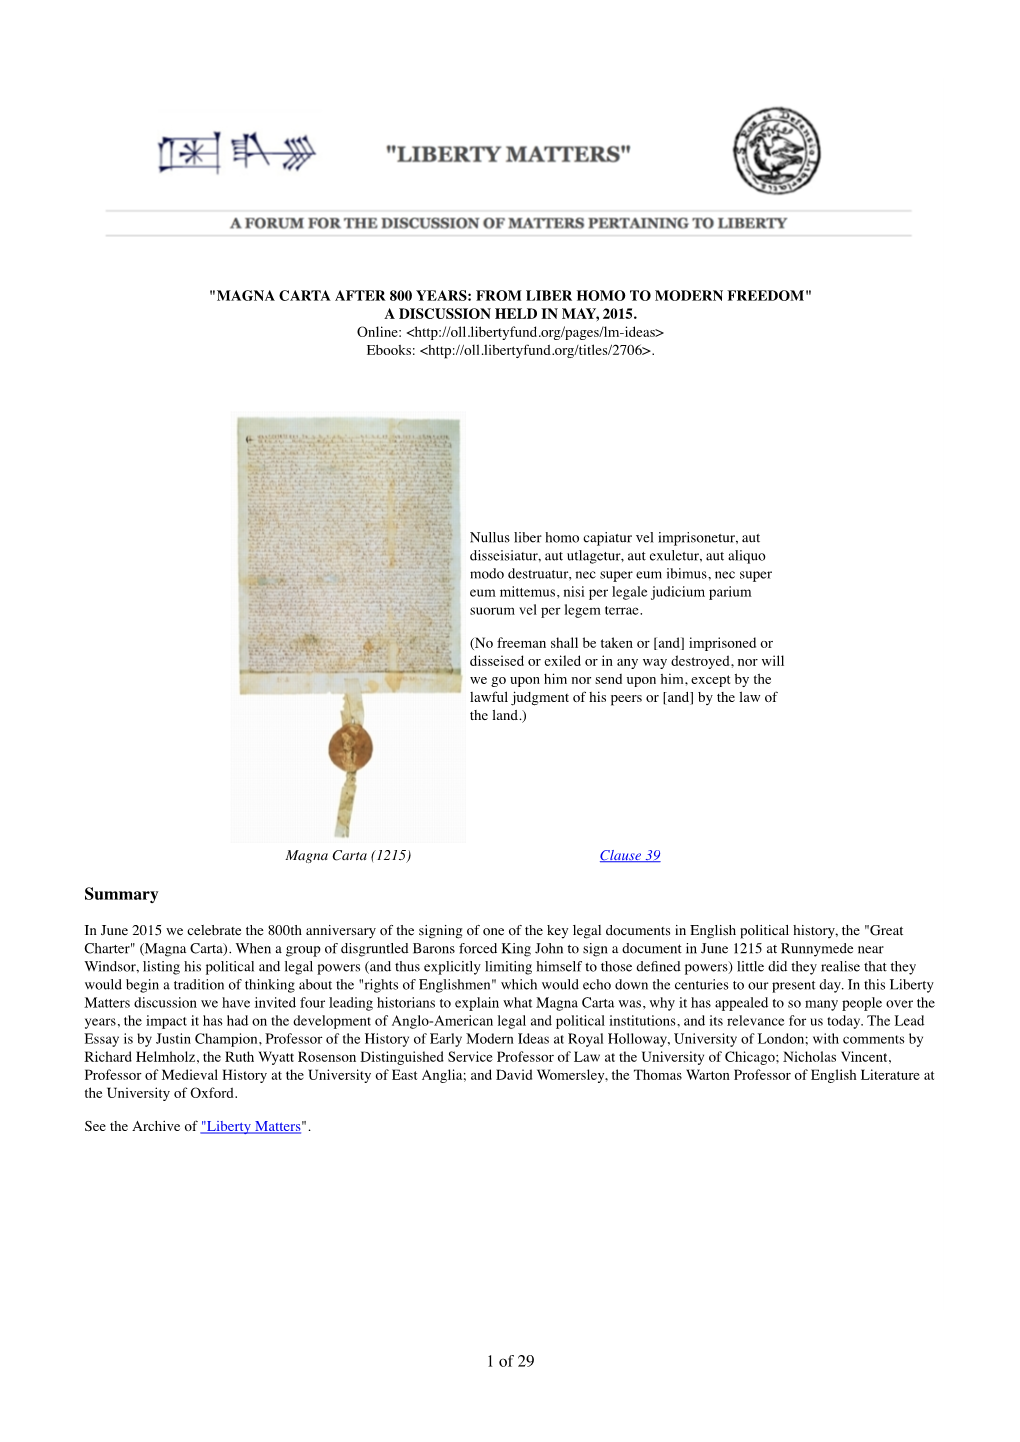 Magna Carta After 800 Years: from Liber Homo to Modern Freedom" a Discussion Held in May, 2015